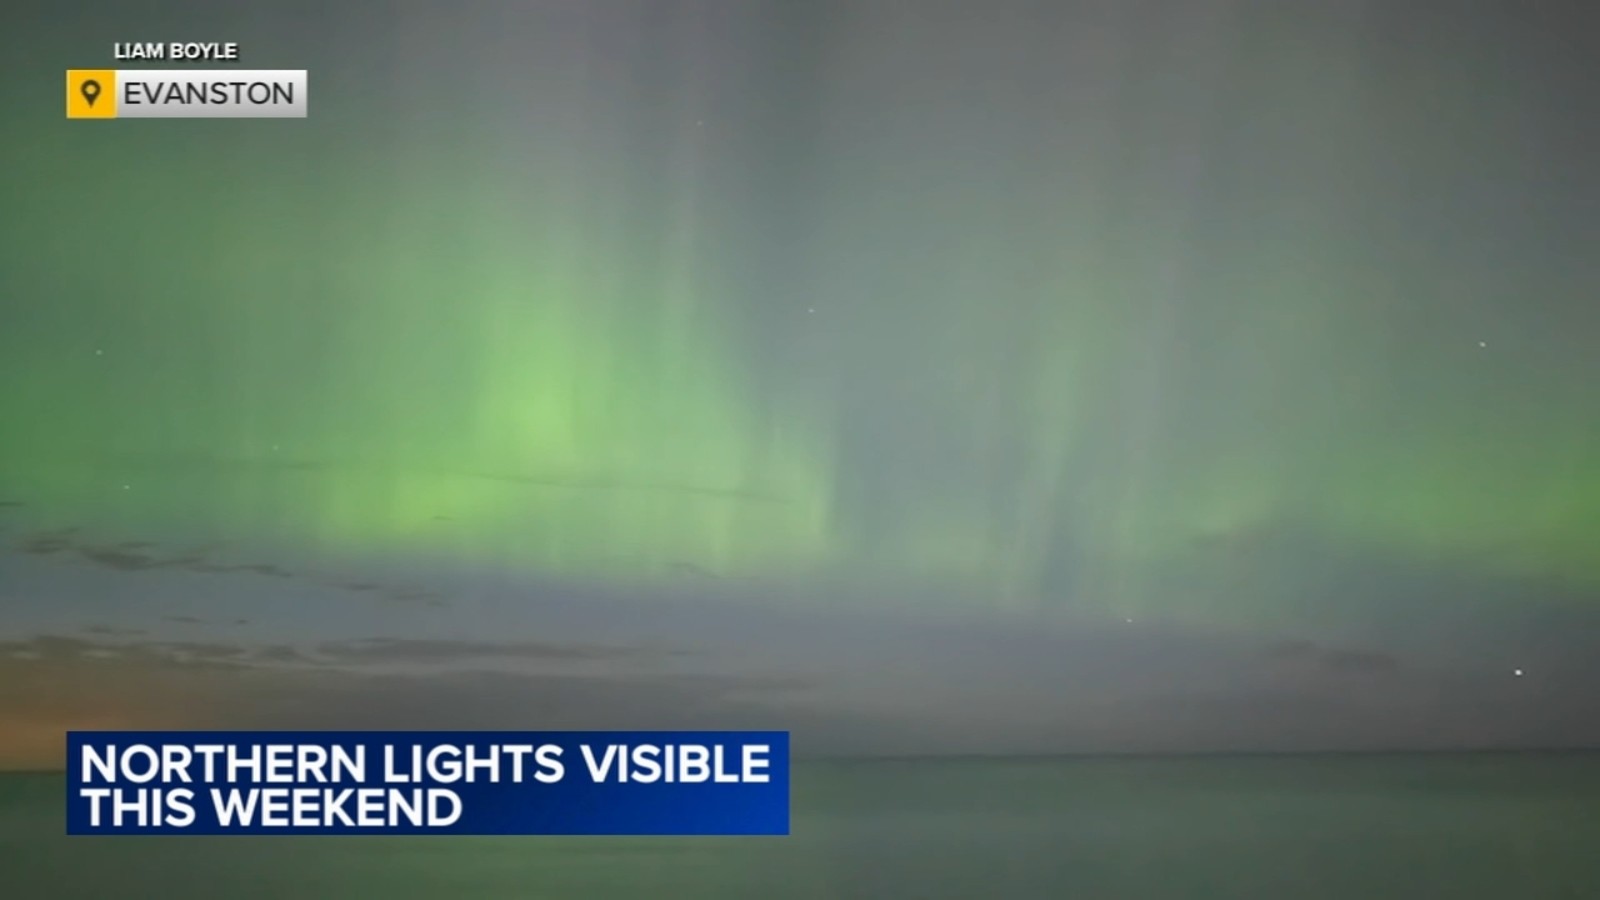 Chicago area has 2nd chance to see Northern Lights Saturday night due to strong solar storm